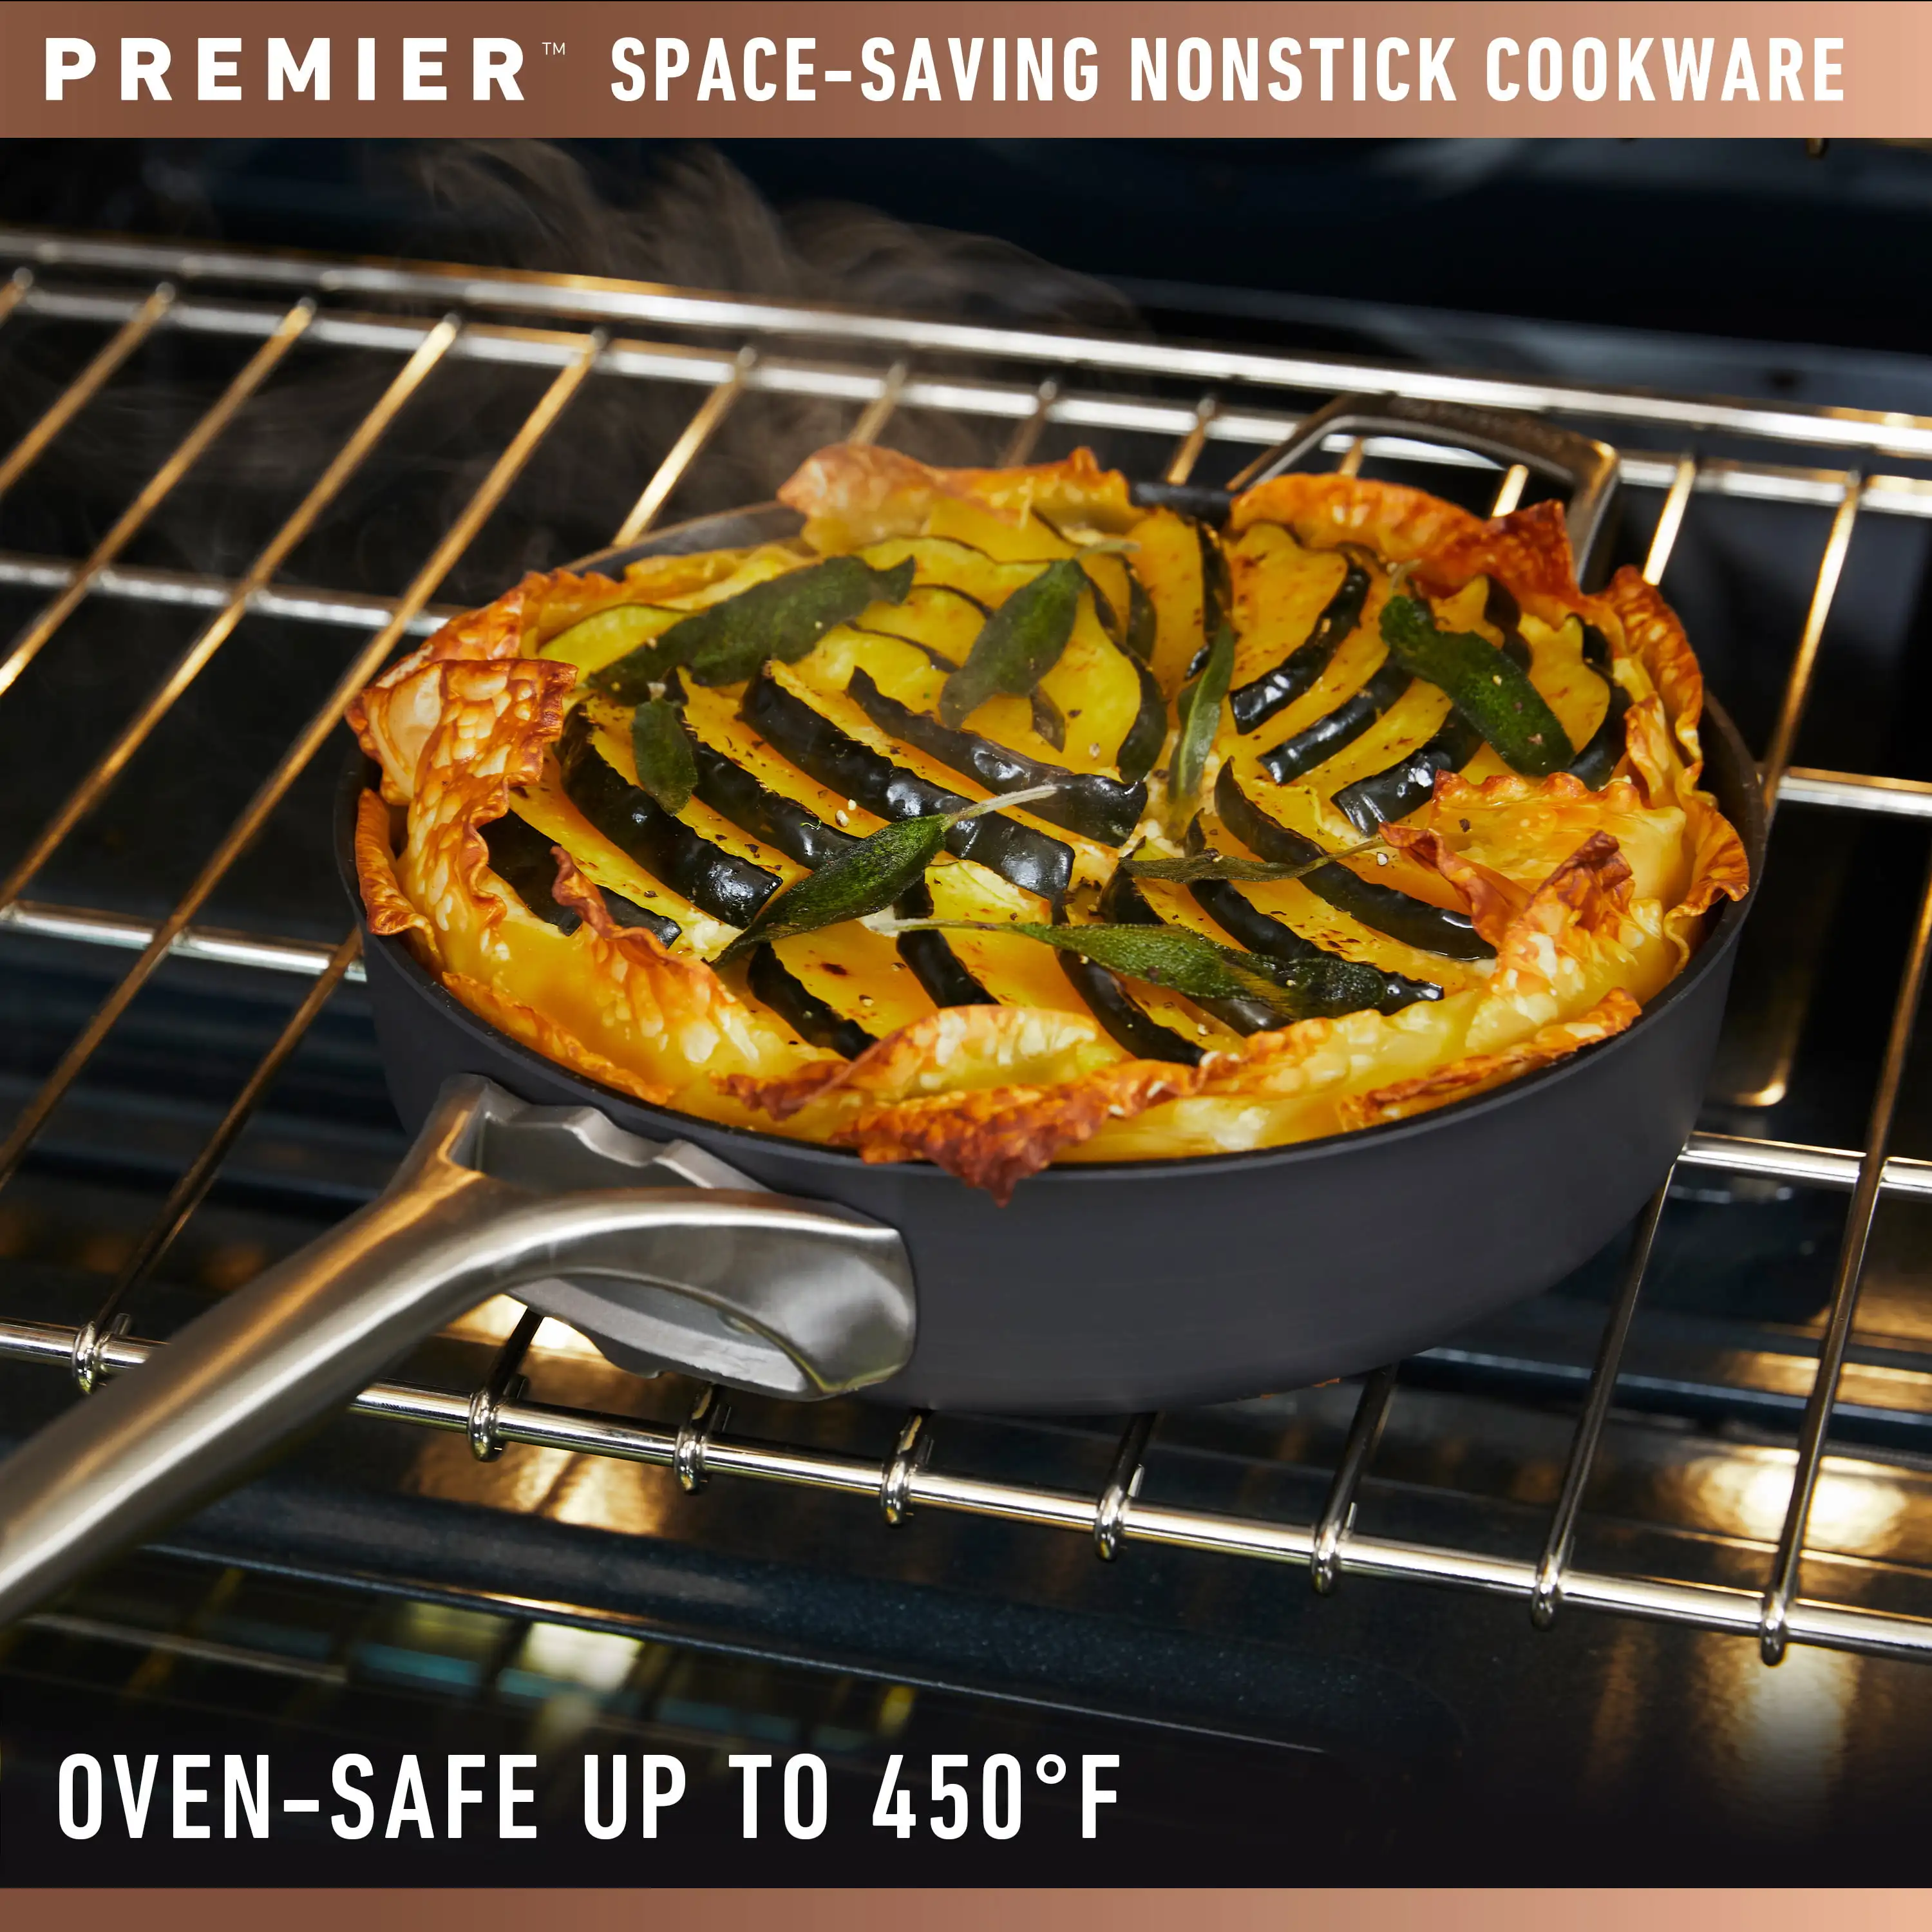 https://ae01.alicdn.com/kf/Sda7a4d2a2f1f47b98a17b71983ff700fh/Calphalon-Premier-Space-Saving-MineralShield-Nonstick-12-Inch-Everyday-Pan-with-Lid.jpg